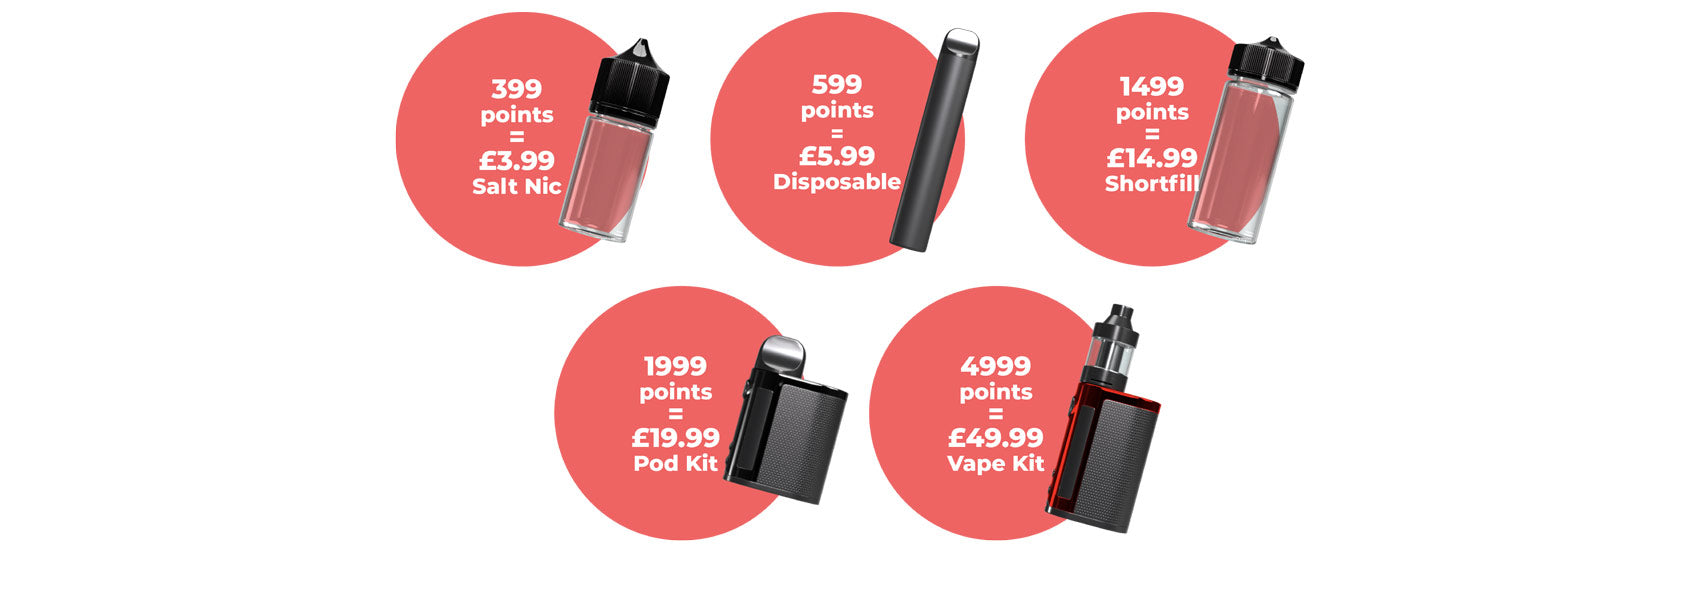 how much are vape points worth